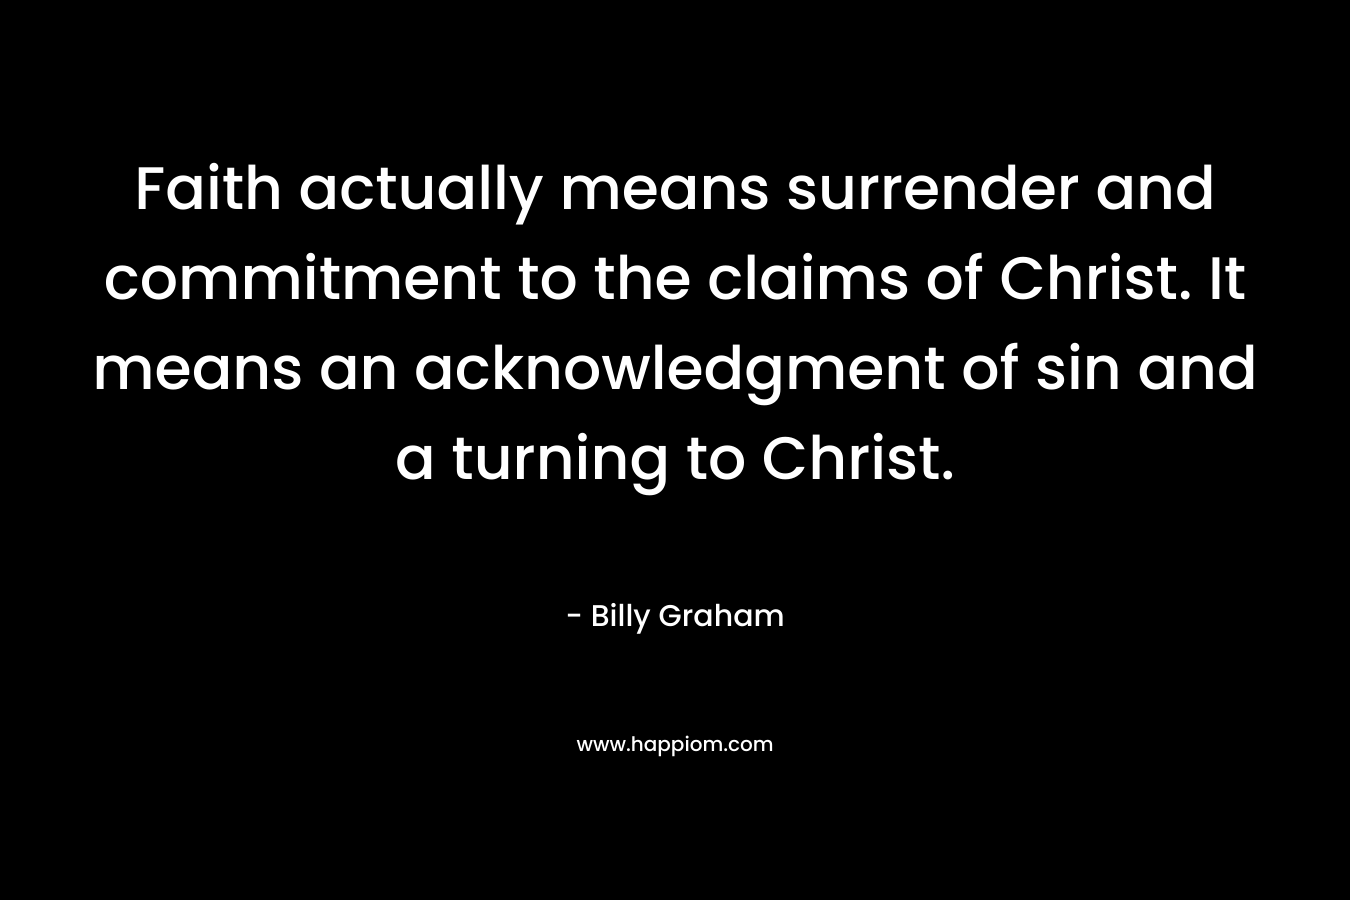 Faith actually means surrender and commitment to the claims of Christ. It means an acknowledgment of sin and a turning to Christ. – Billy Graham